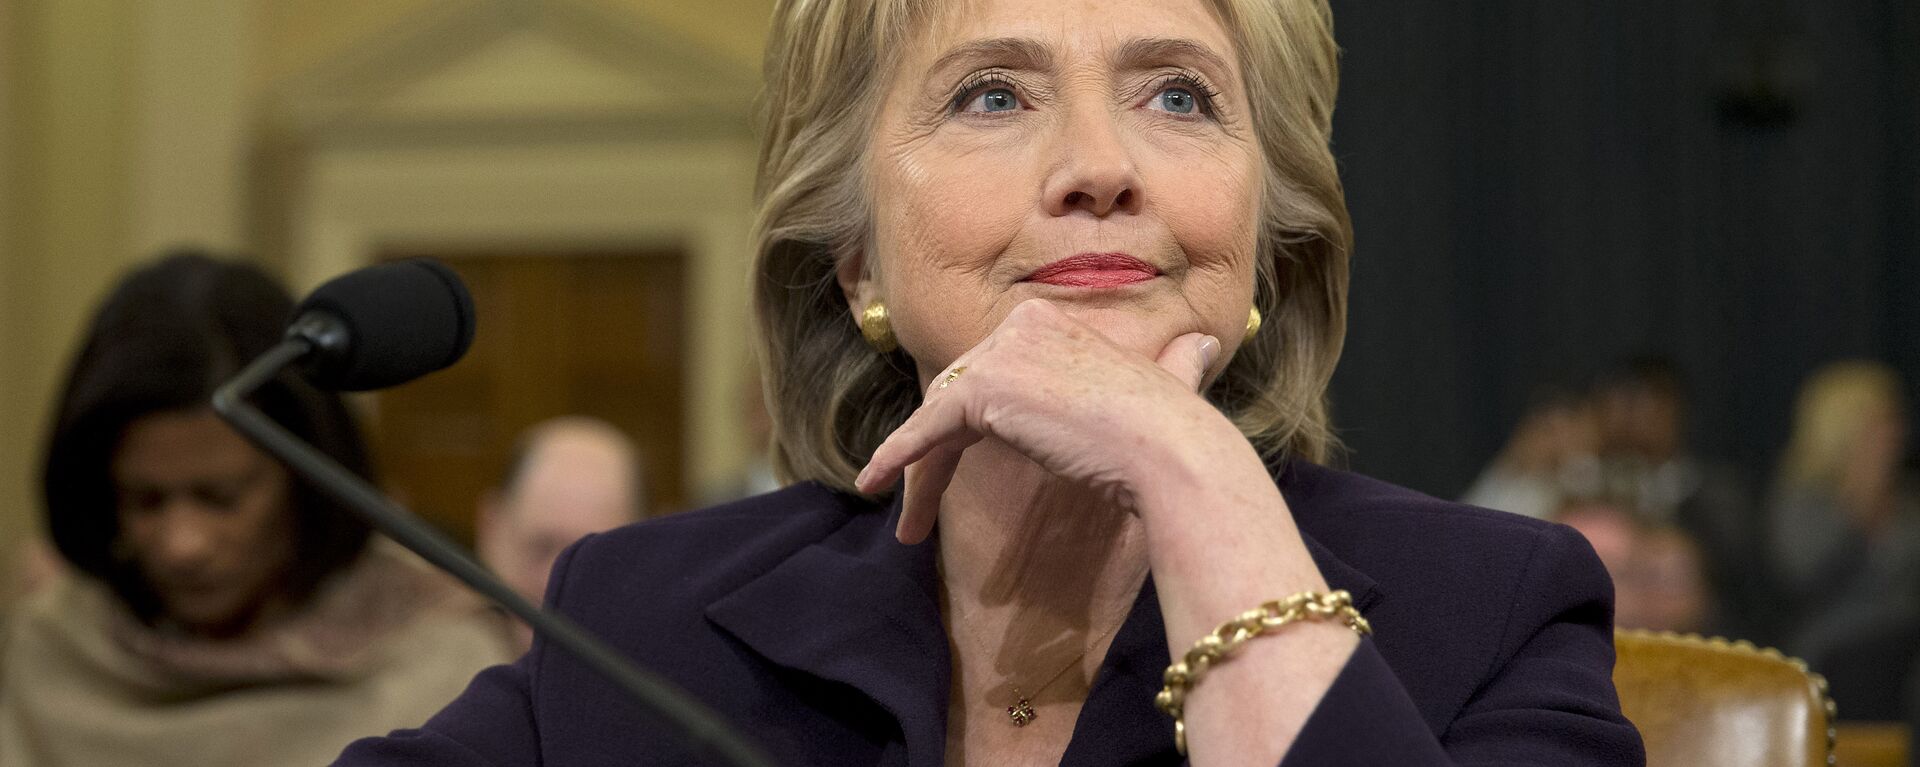 Democratic presidential candidate and former Secretary of State Hillary Rodham Clinton, listens as she testifies on Capitol Hill in Washington, Thursday, Oct. 22, 2015, before the House Select Committee on Benghazi - Sputnik International, 1920, 23.11.2016